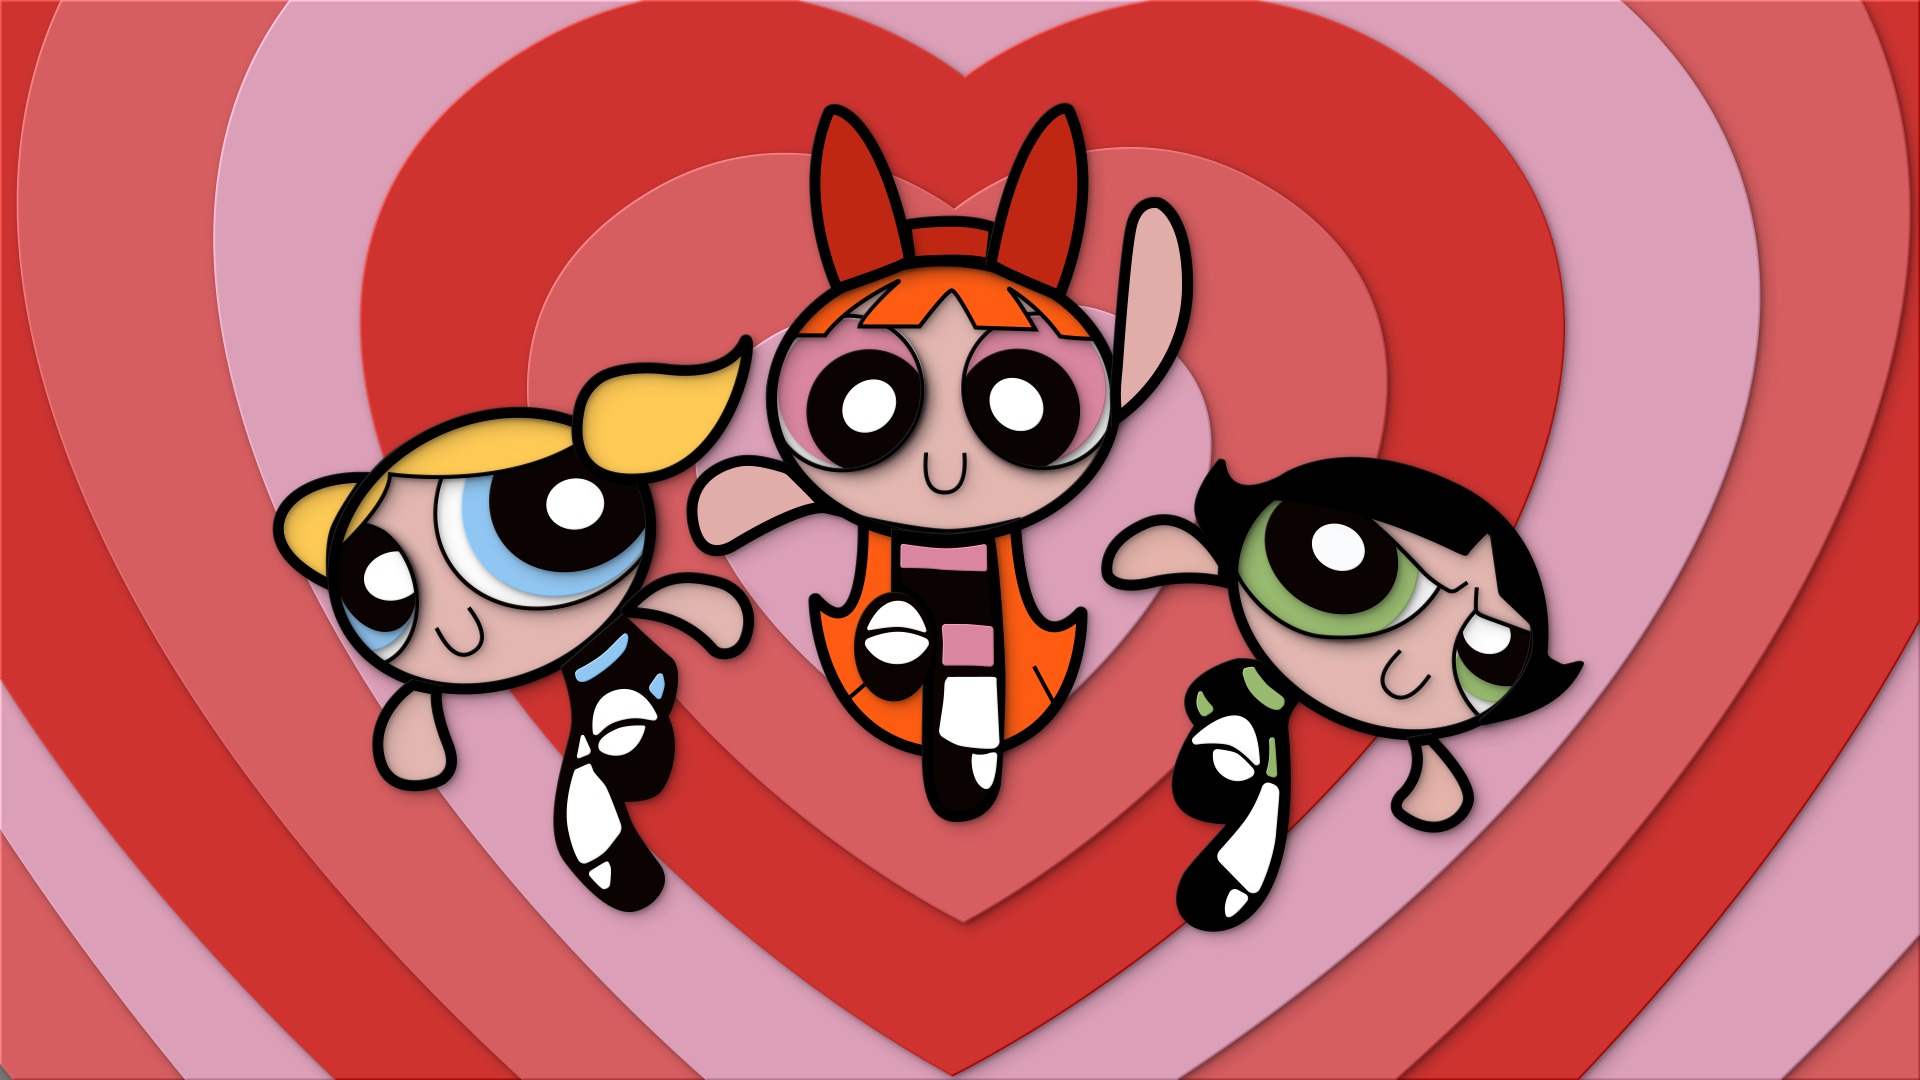 cena paul recommends Pics Of The Power Puff Girls